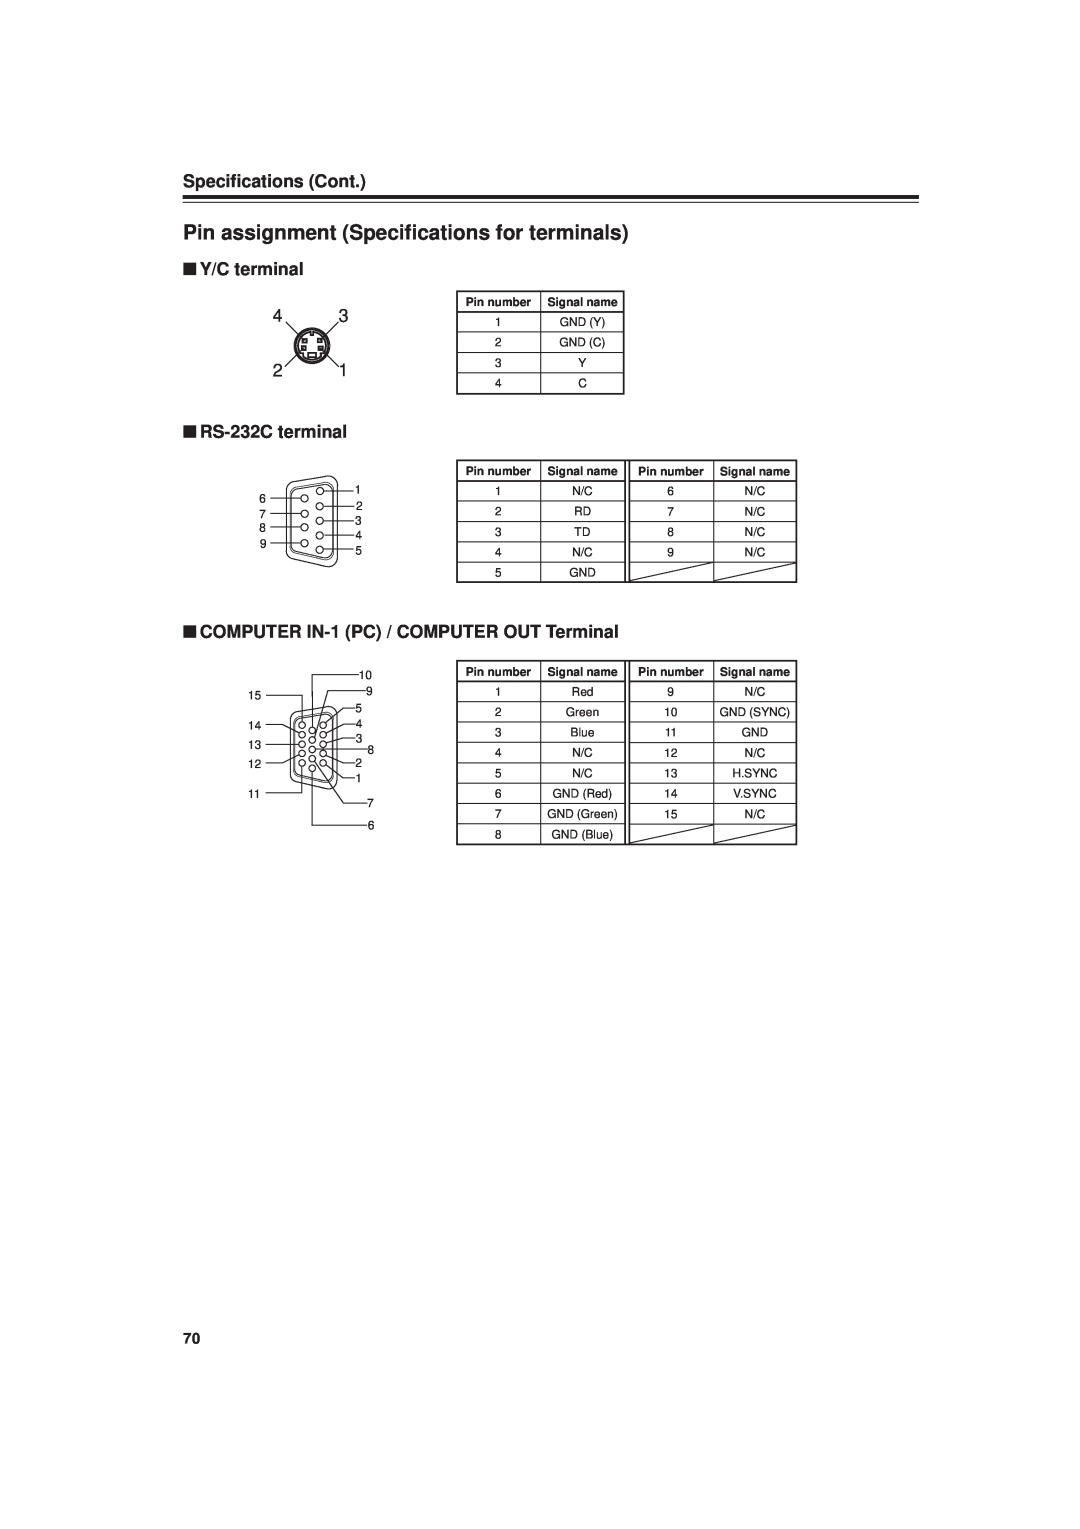 JVC DLA-G20U Pin assignment Specifications for terminals, Specifications Cont, Y/C terminal, RS-232C terminal, Pin number 